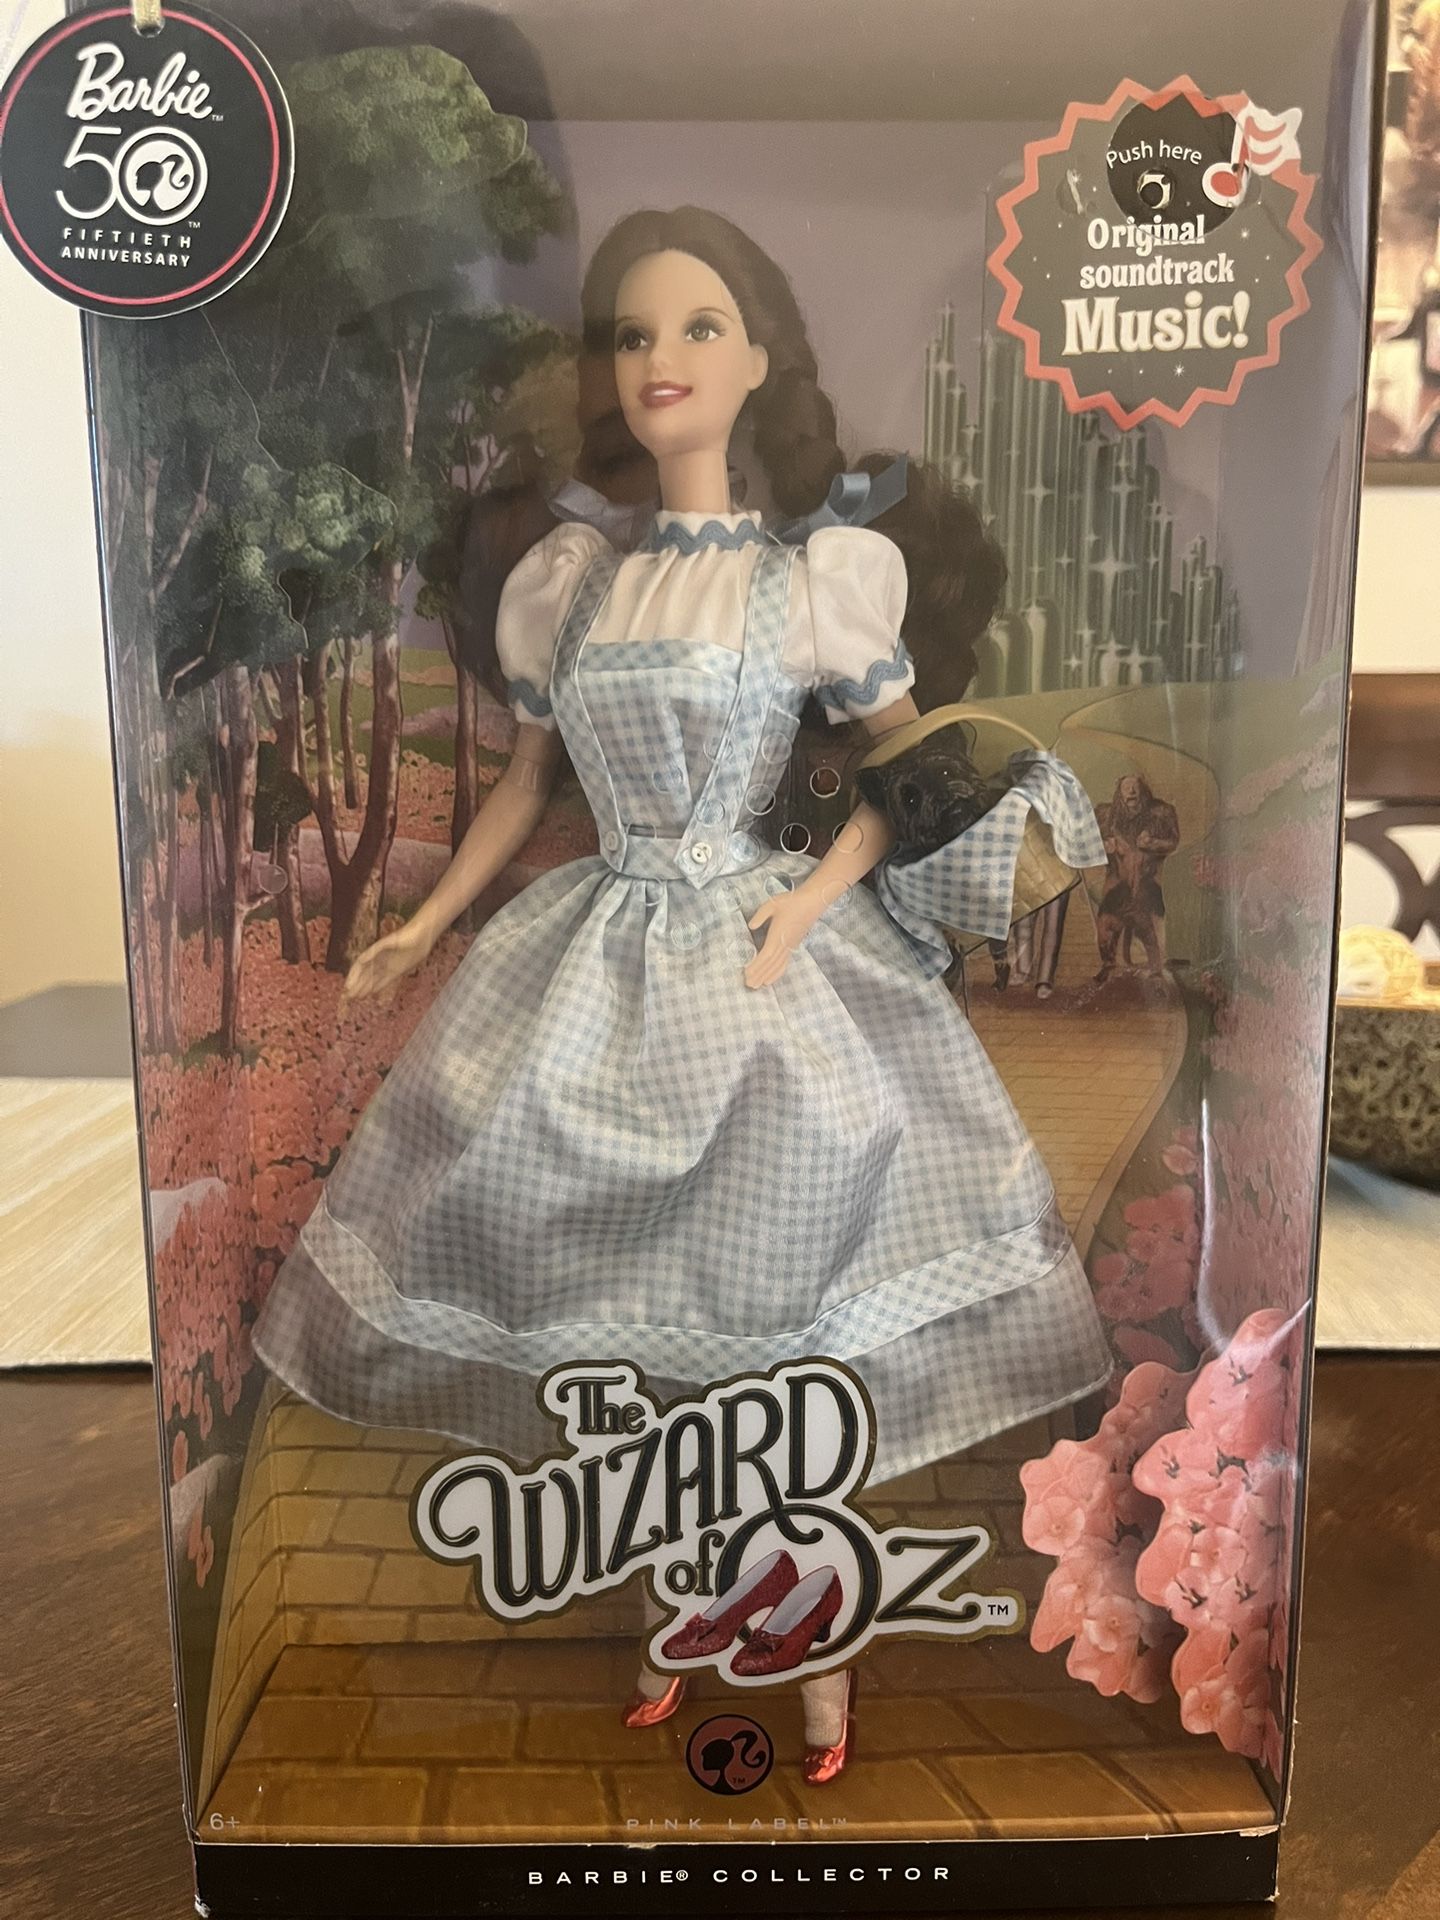 50th Anniversary Dorothy, Scarecrow and the Cowardly Lion/Wizard of Oz collectible Barbie